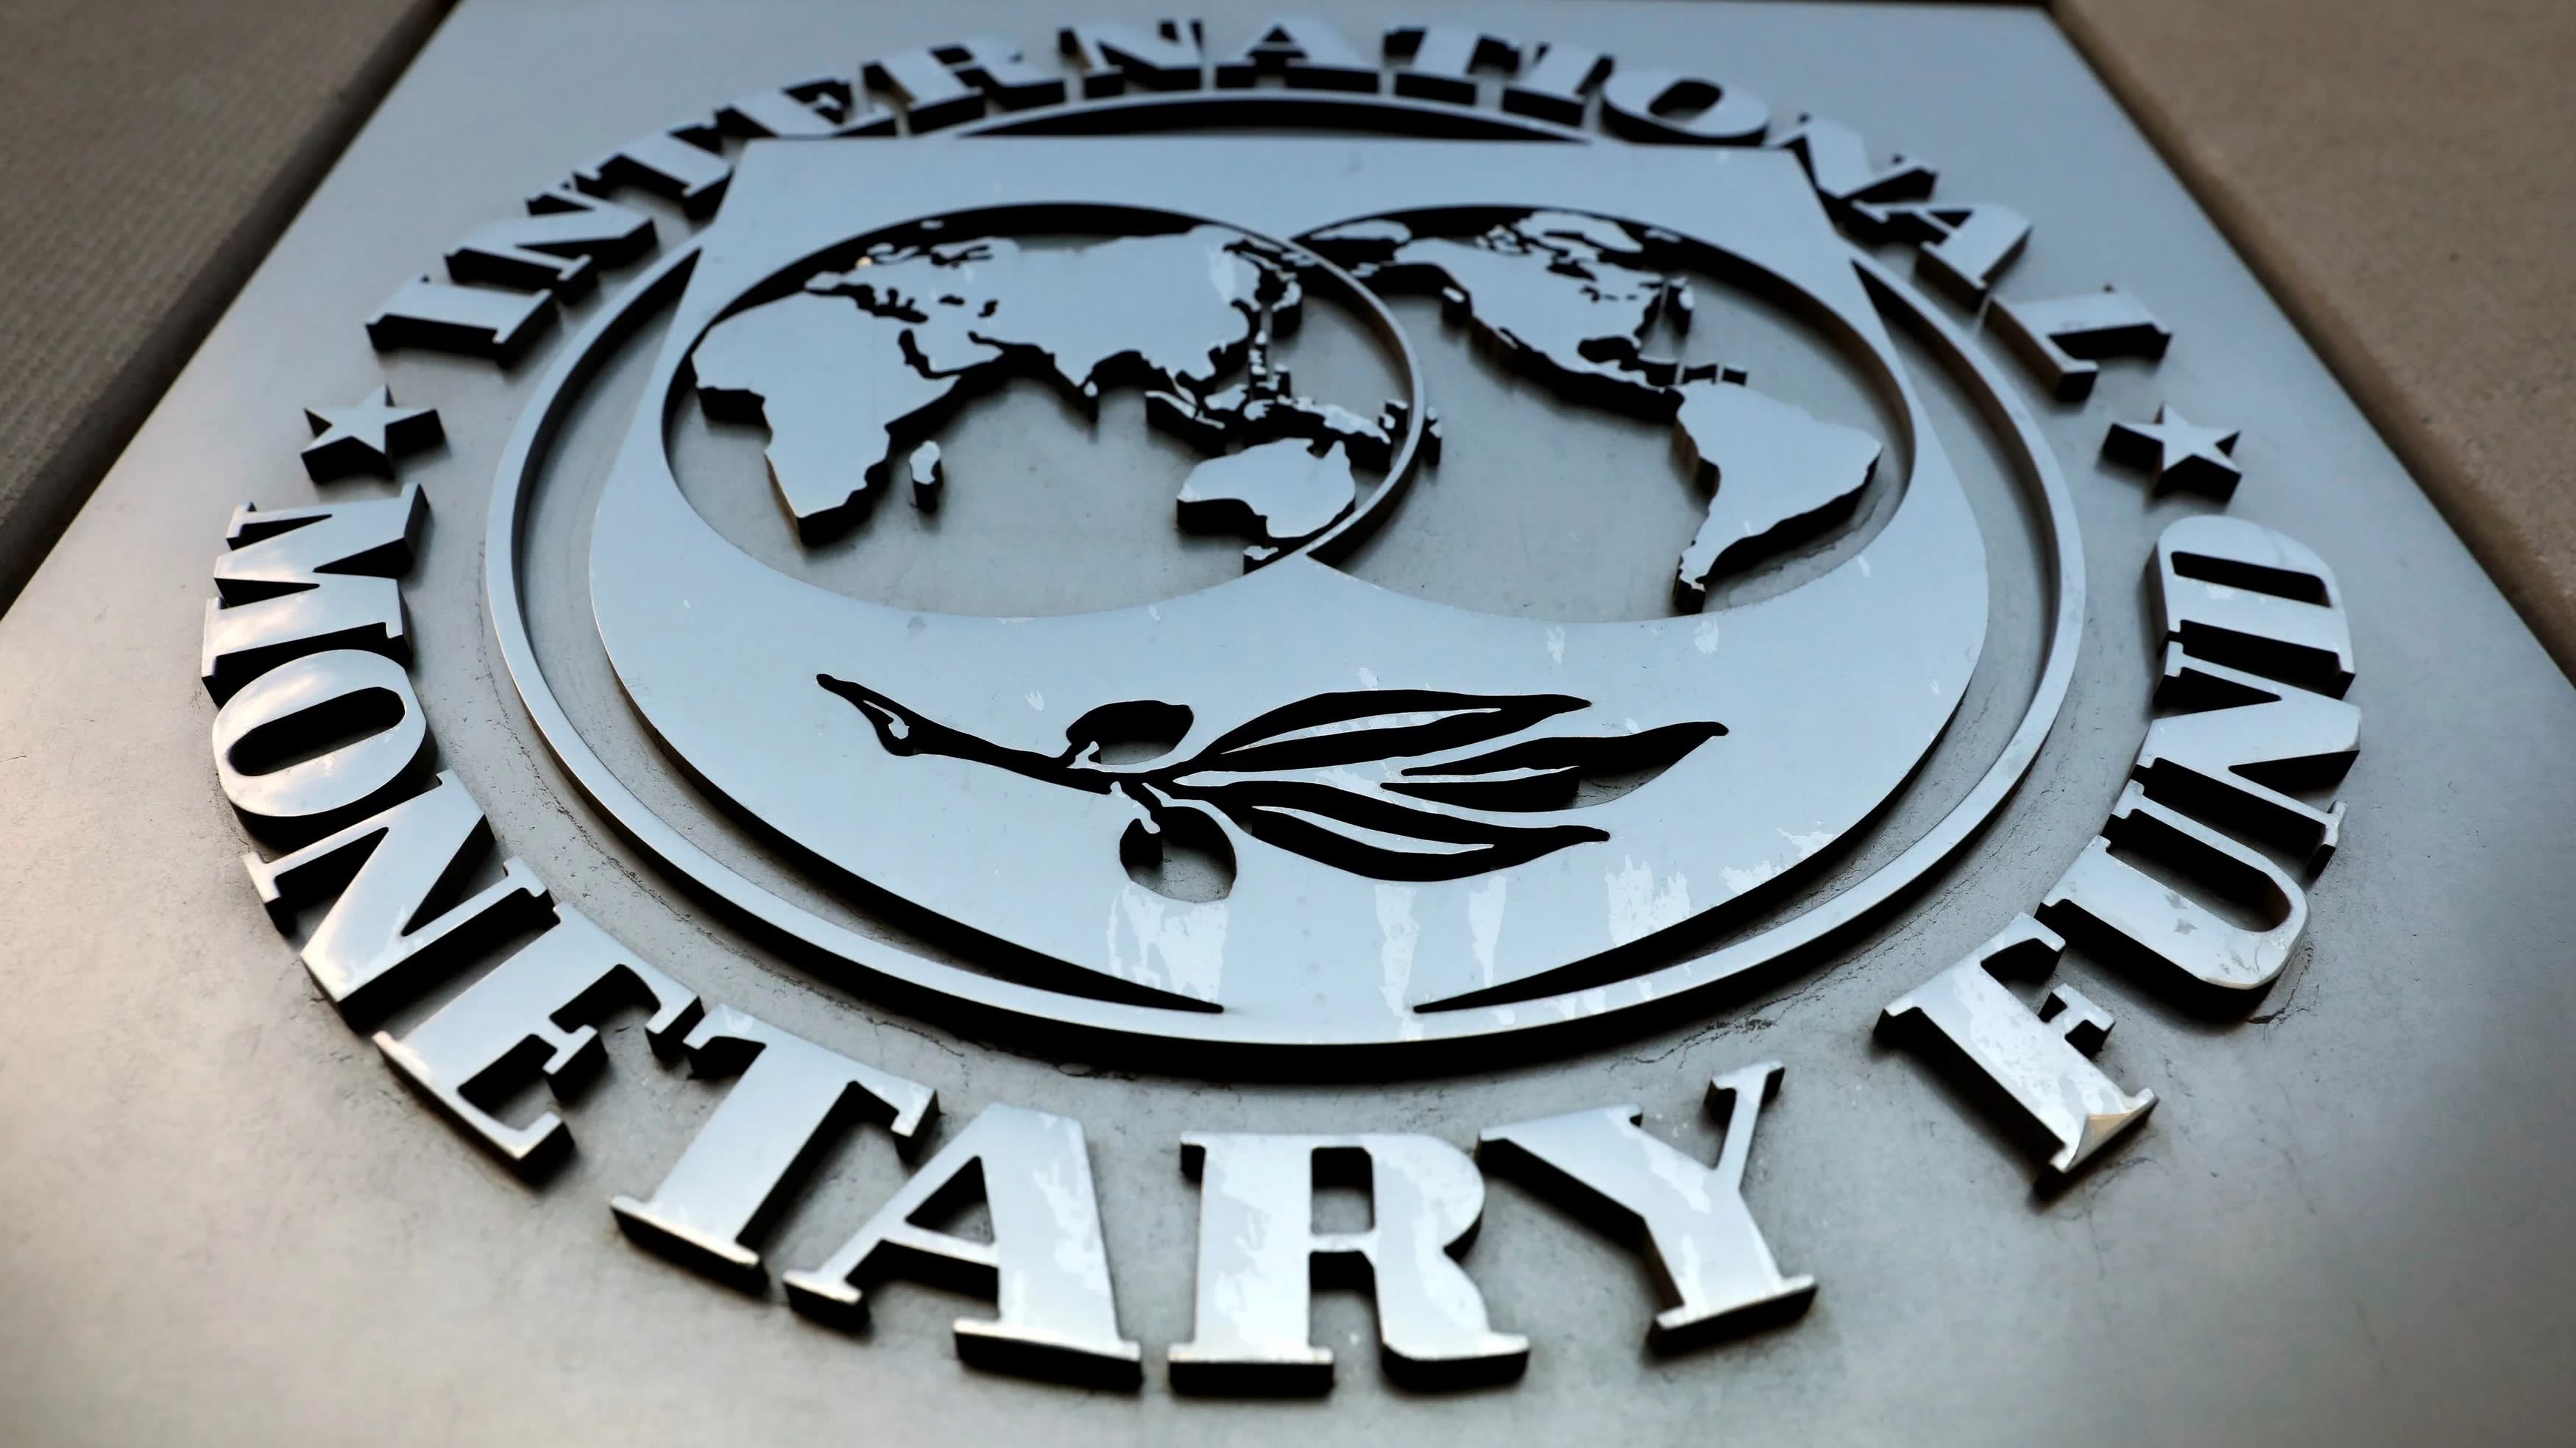 Strengthen anti-corruption frameworks to bolster investor confidence and promote growth in Guyana – IMF